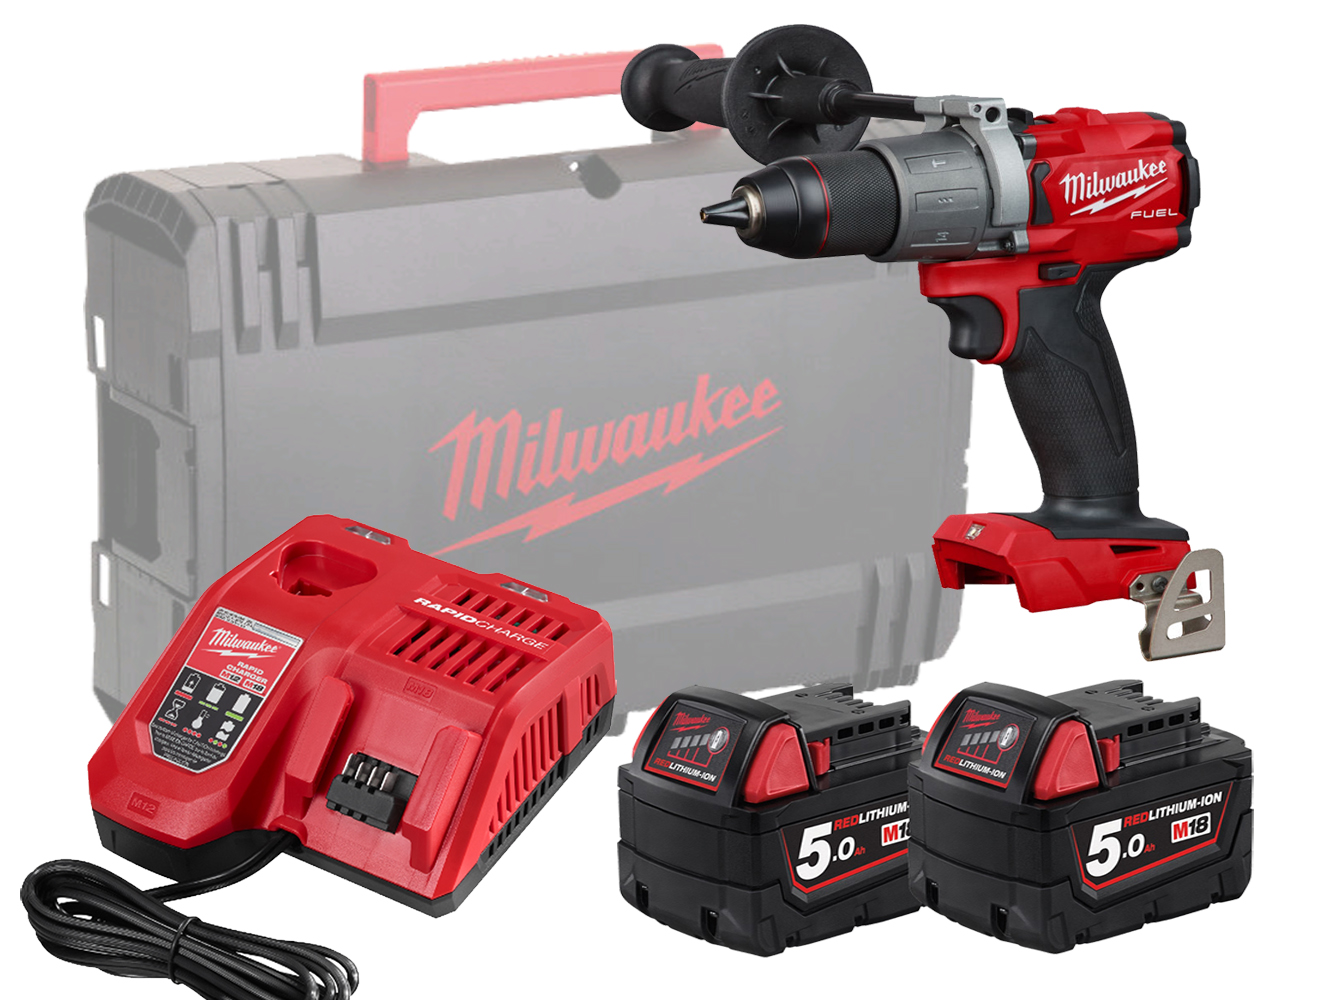 Milwaukee M18FPD2 18V Fuel Brushless Percussion Drill - 5.0Ah Pack